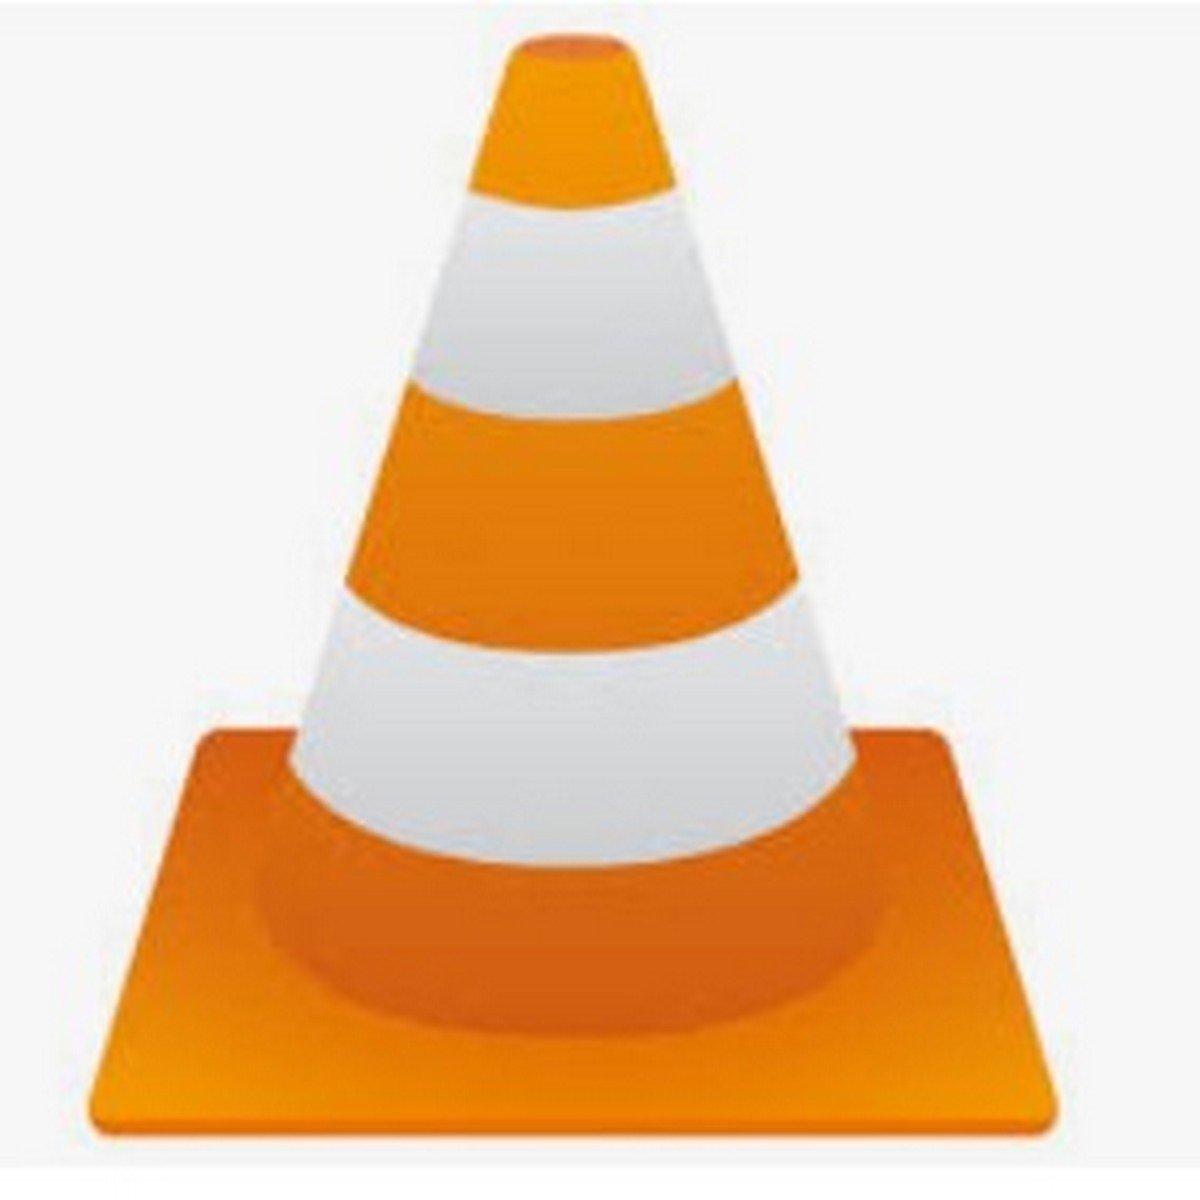 vlc download for mac